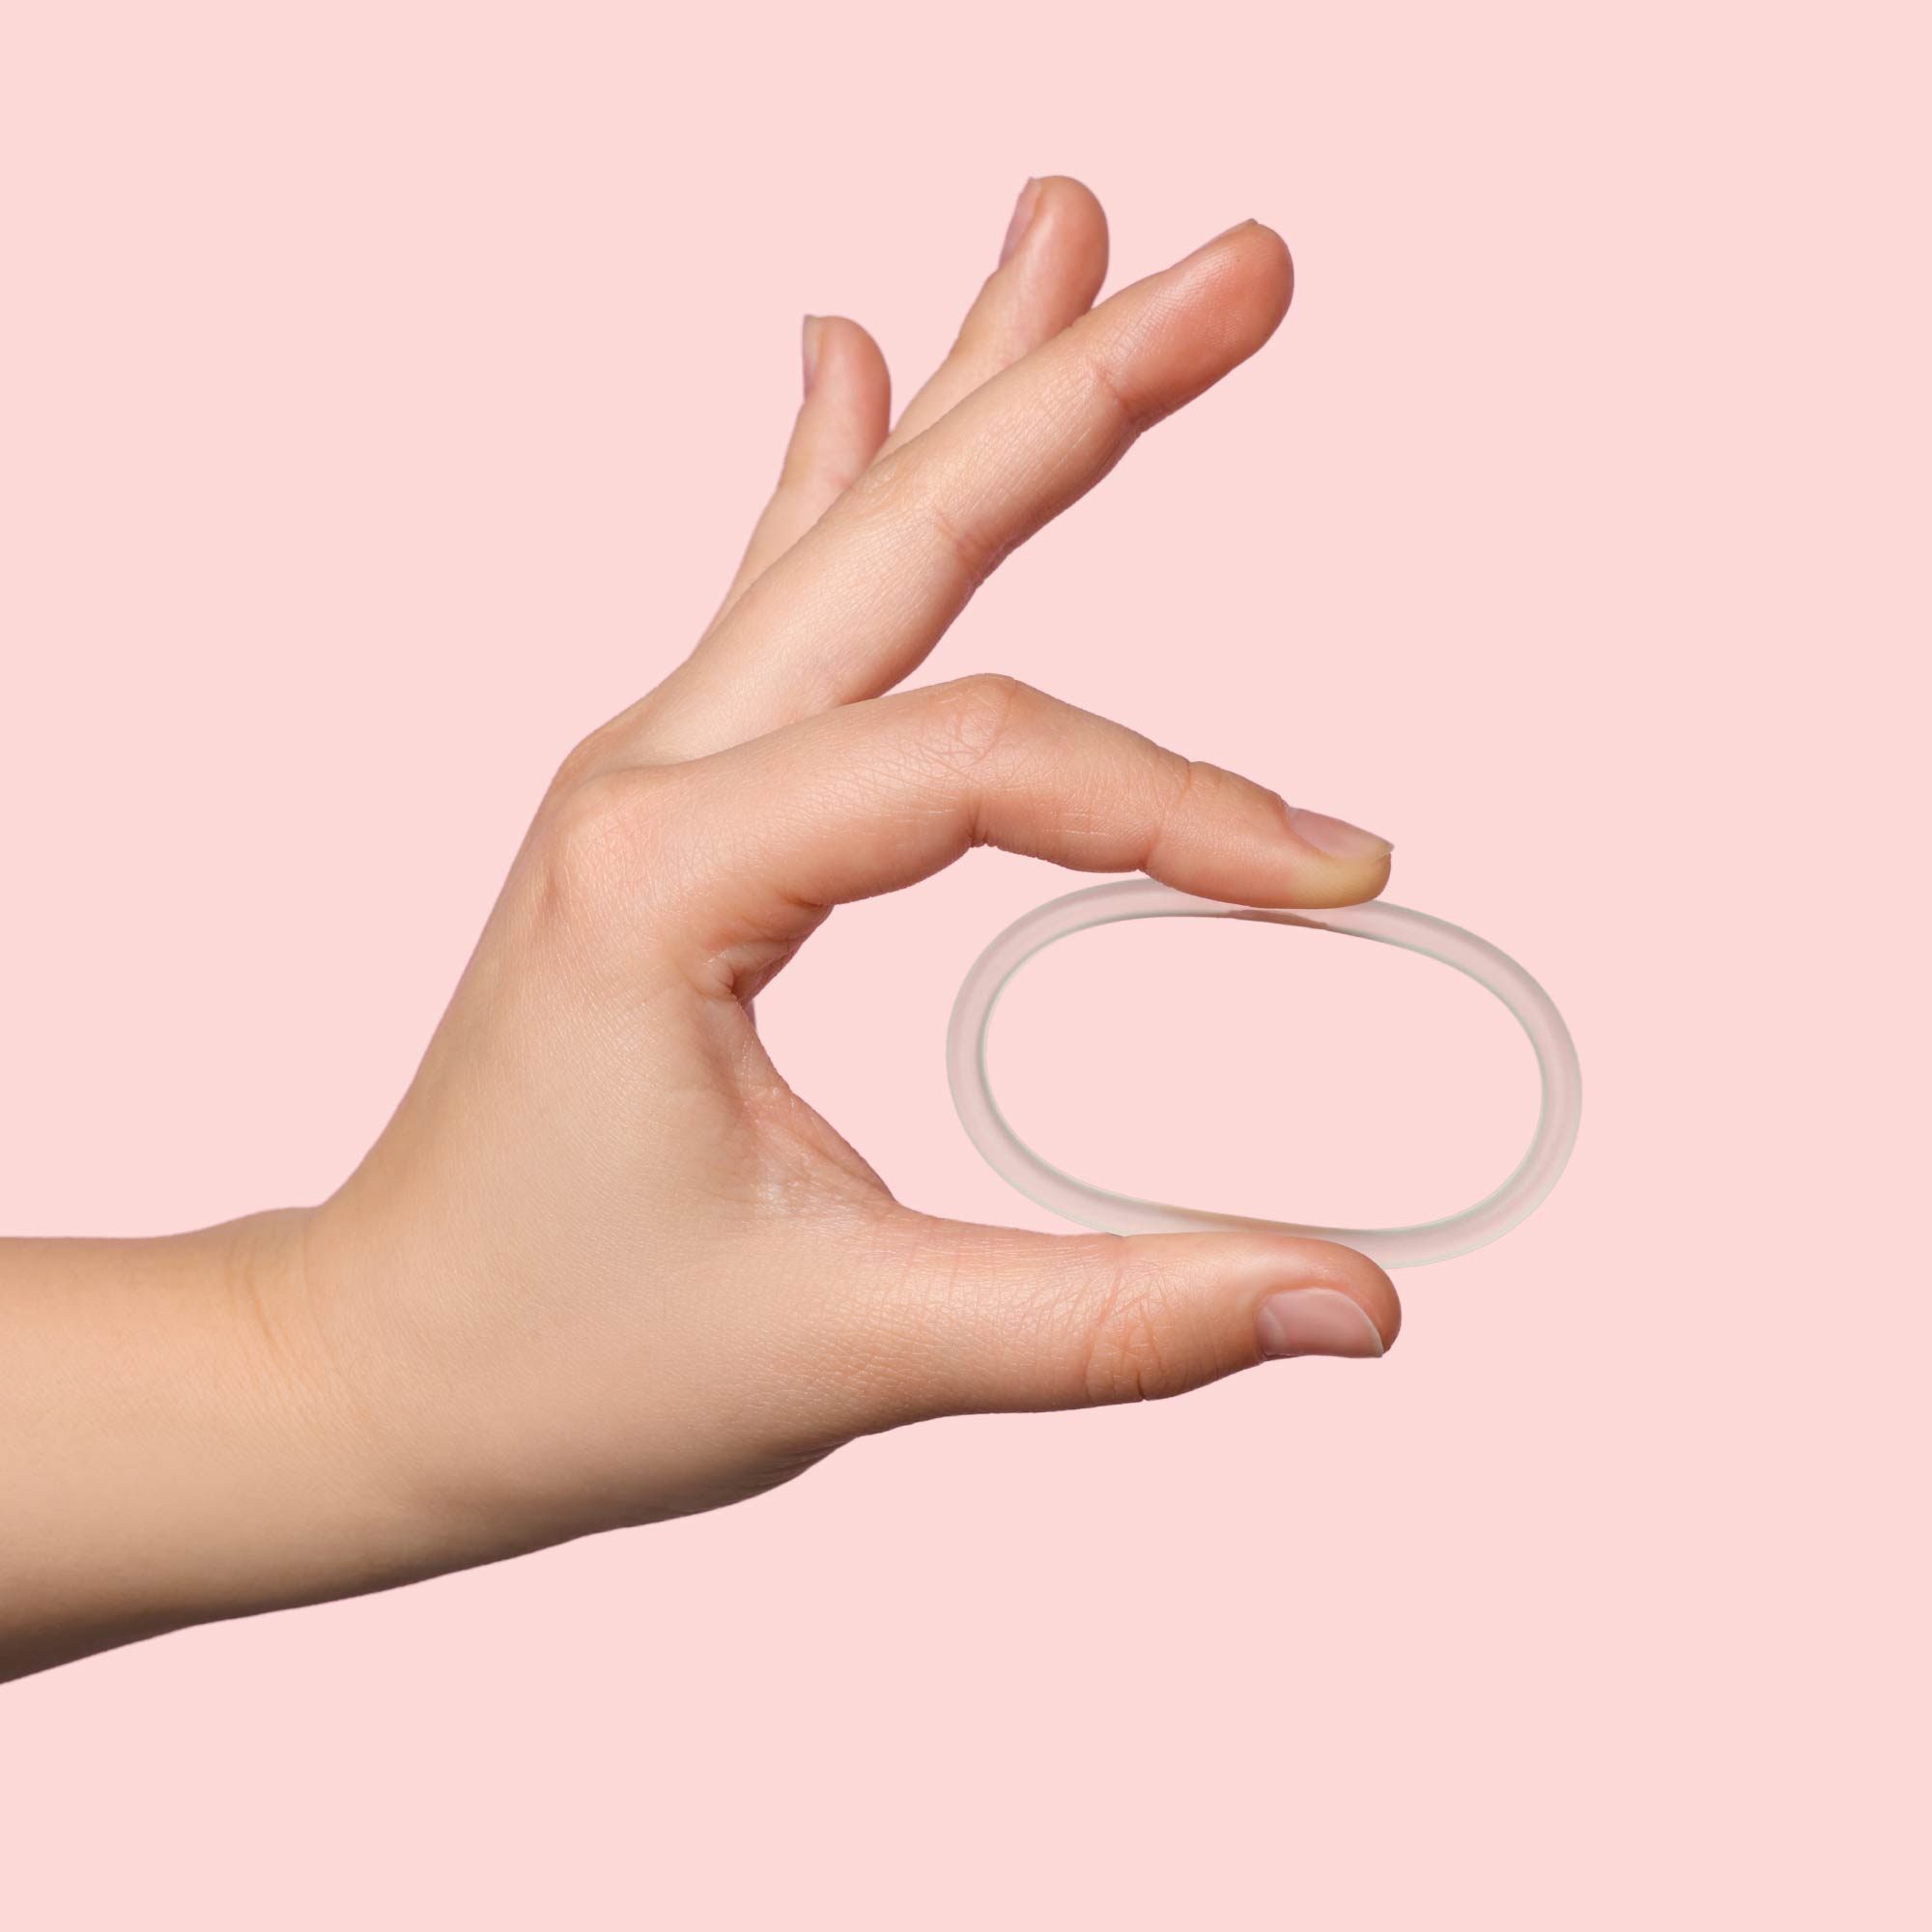 Woman's hand holding NuvaRing Birth Control with a pink background